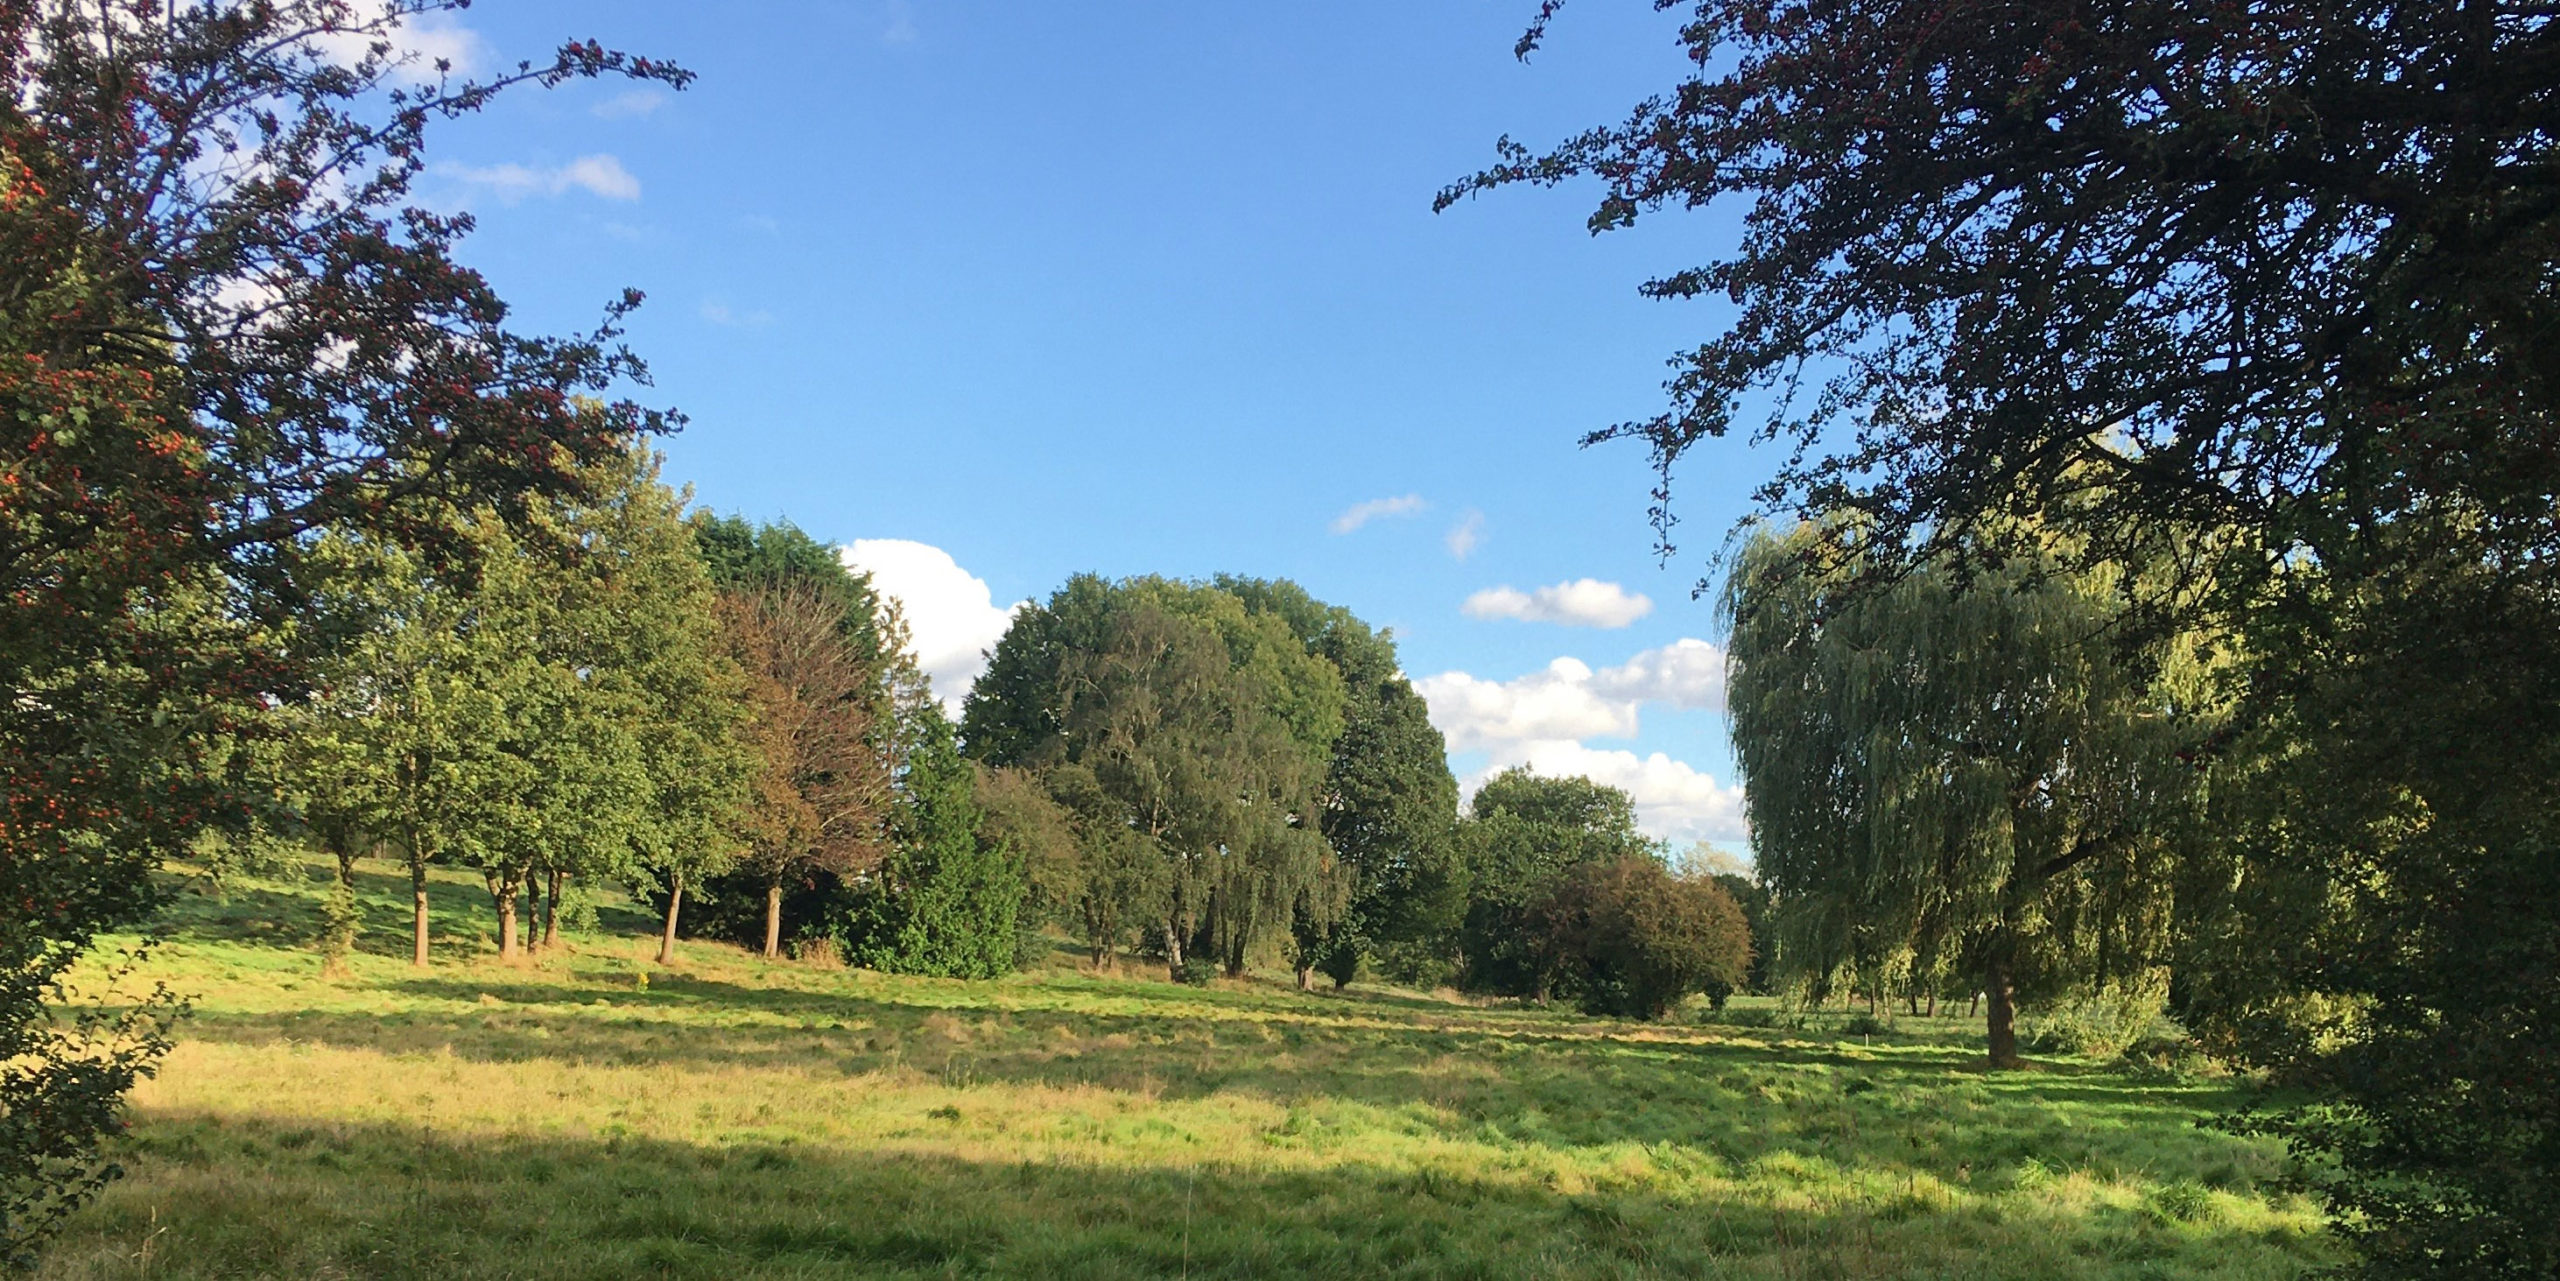 a former golf course, this is a beautiful landscape in the Green Belt with green grass and lots of trees